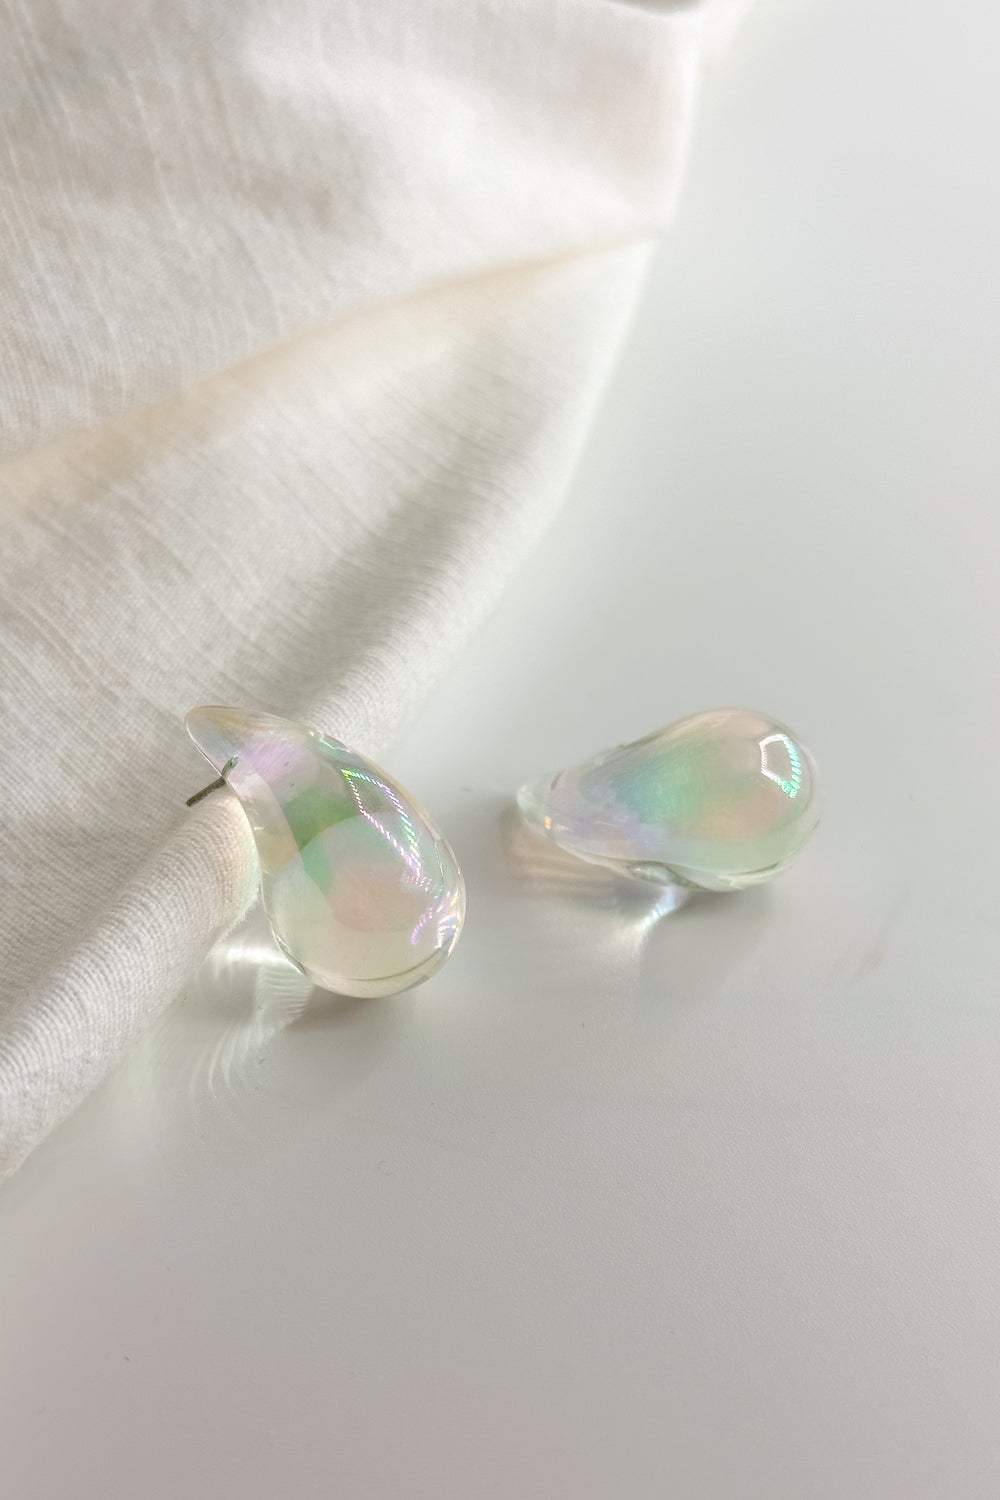 Flat lay view of the Mila Iridescent Scoop Teardrop Stud Earring which features iridescent teardrop studs